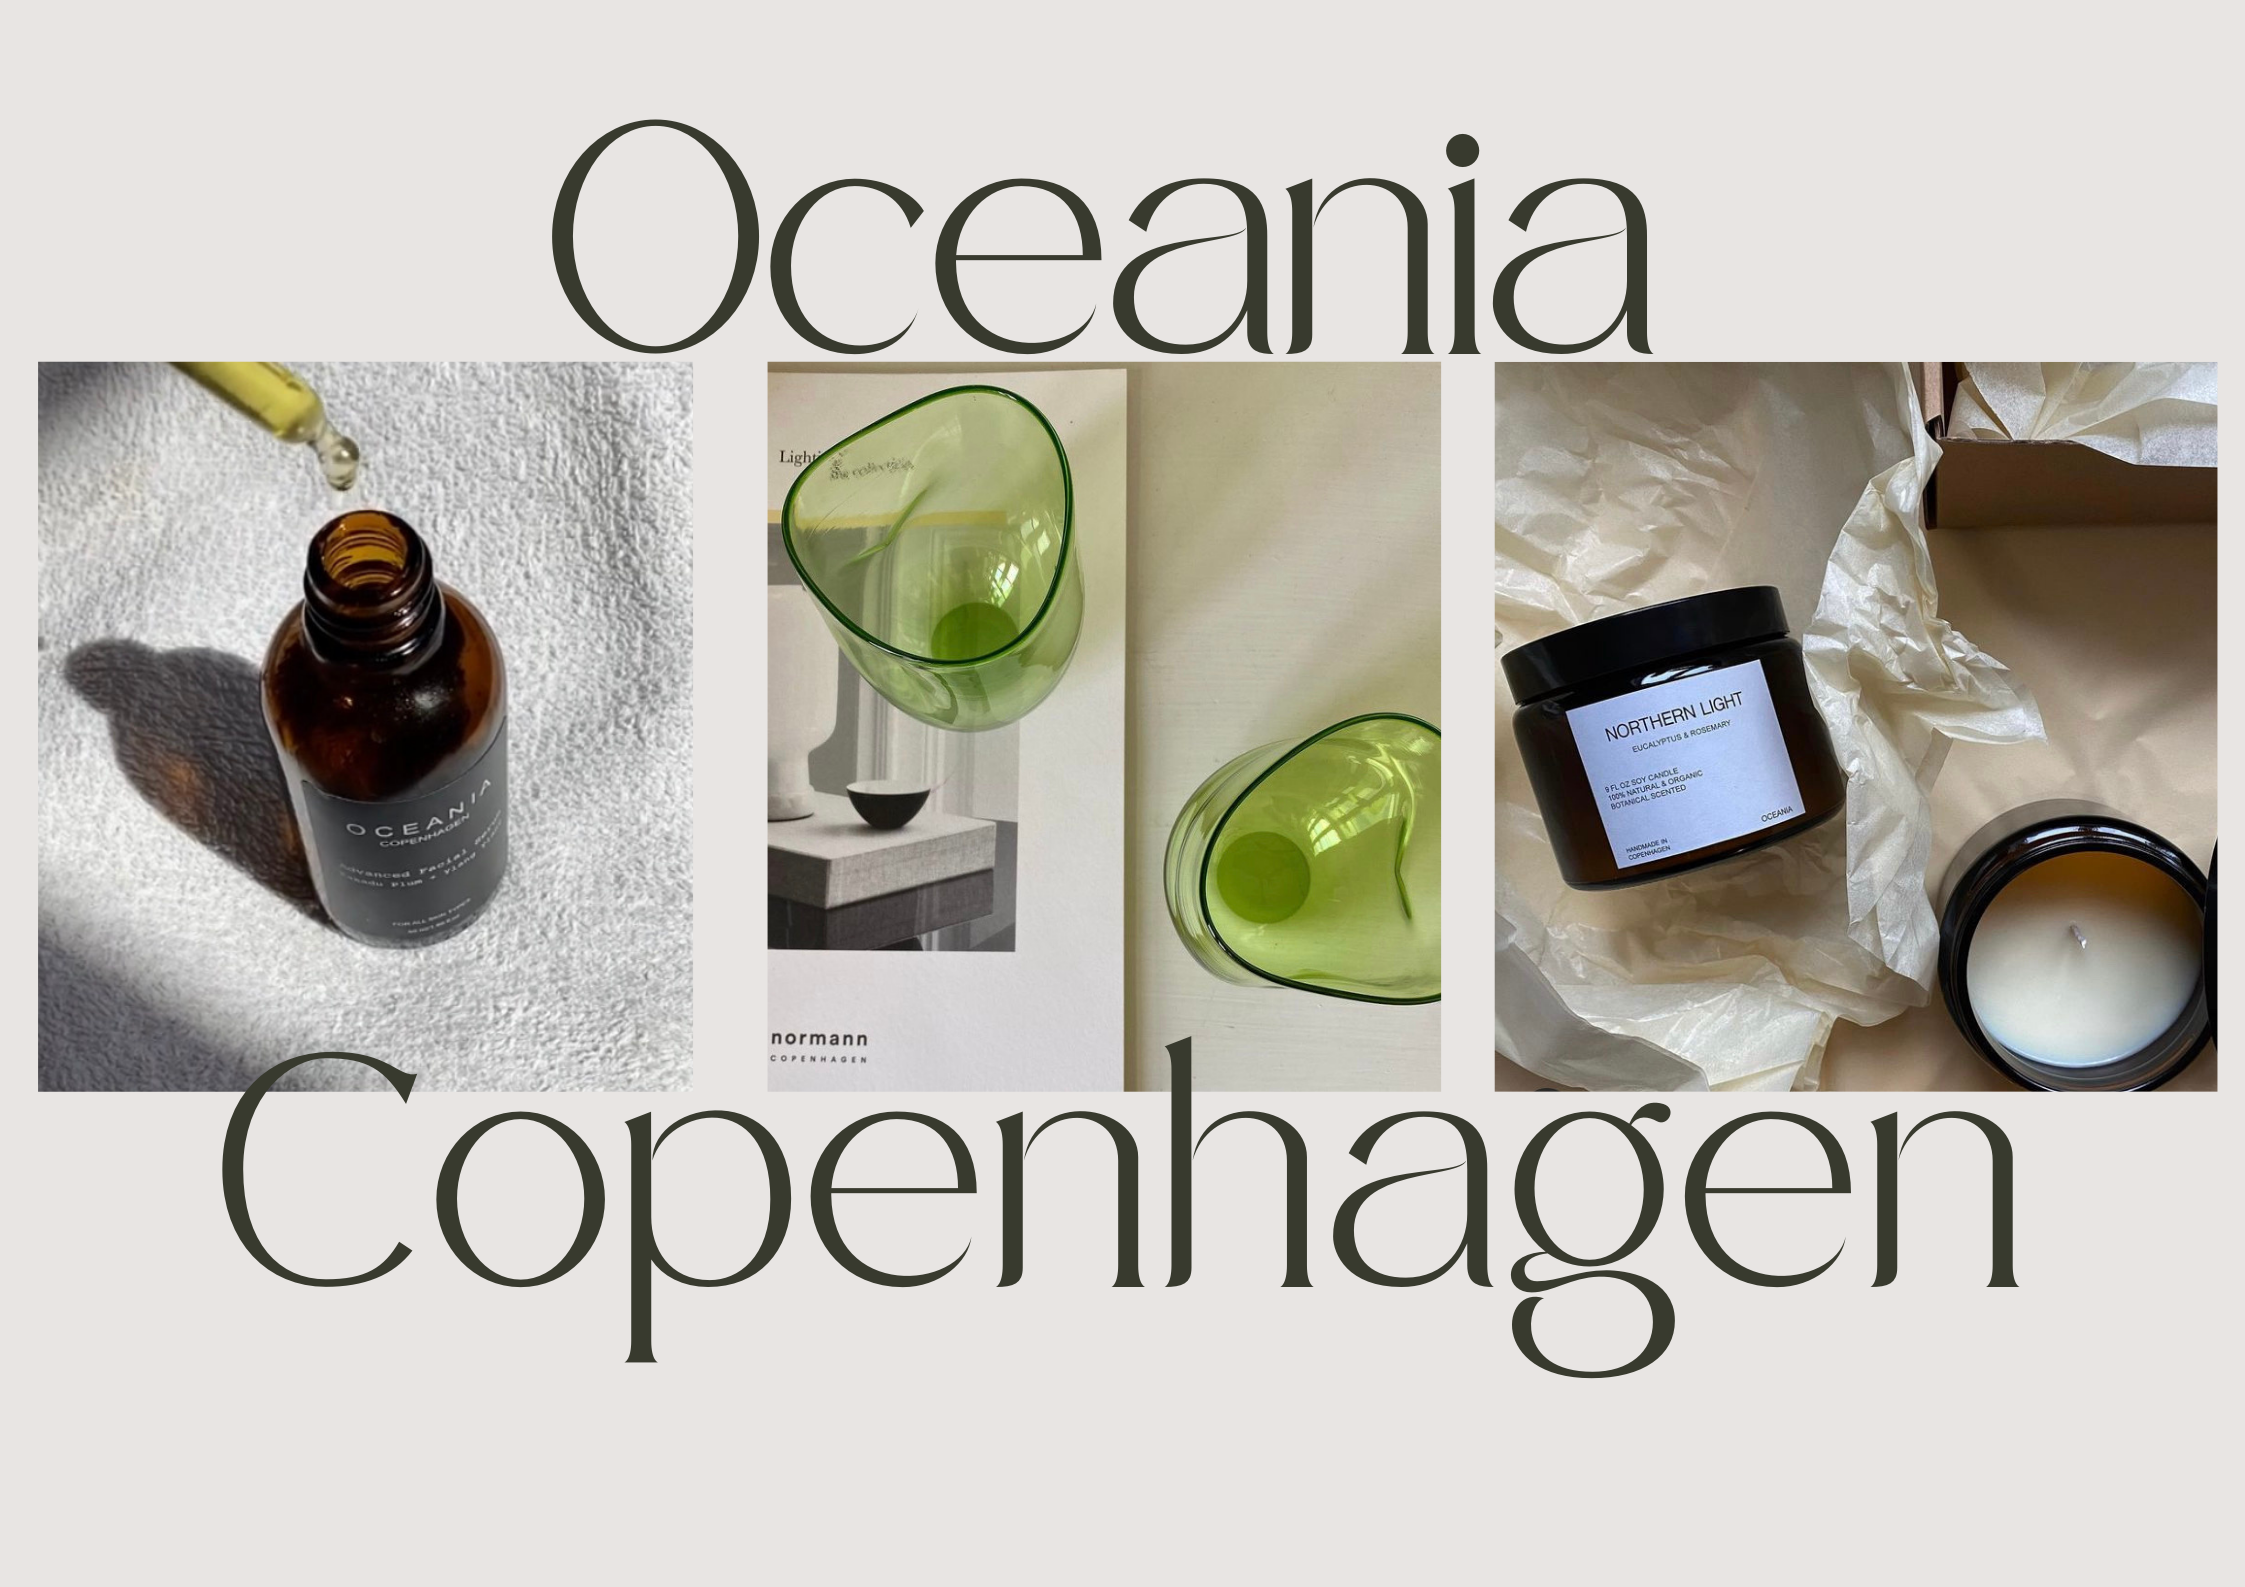 Oceania Copenhagen: A brand with sustainability at its heart